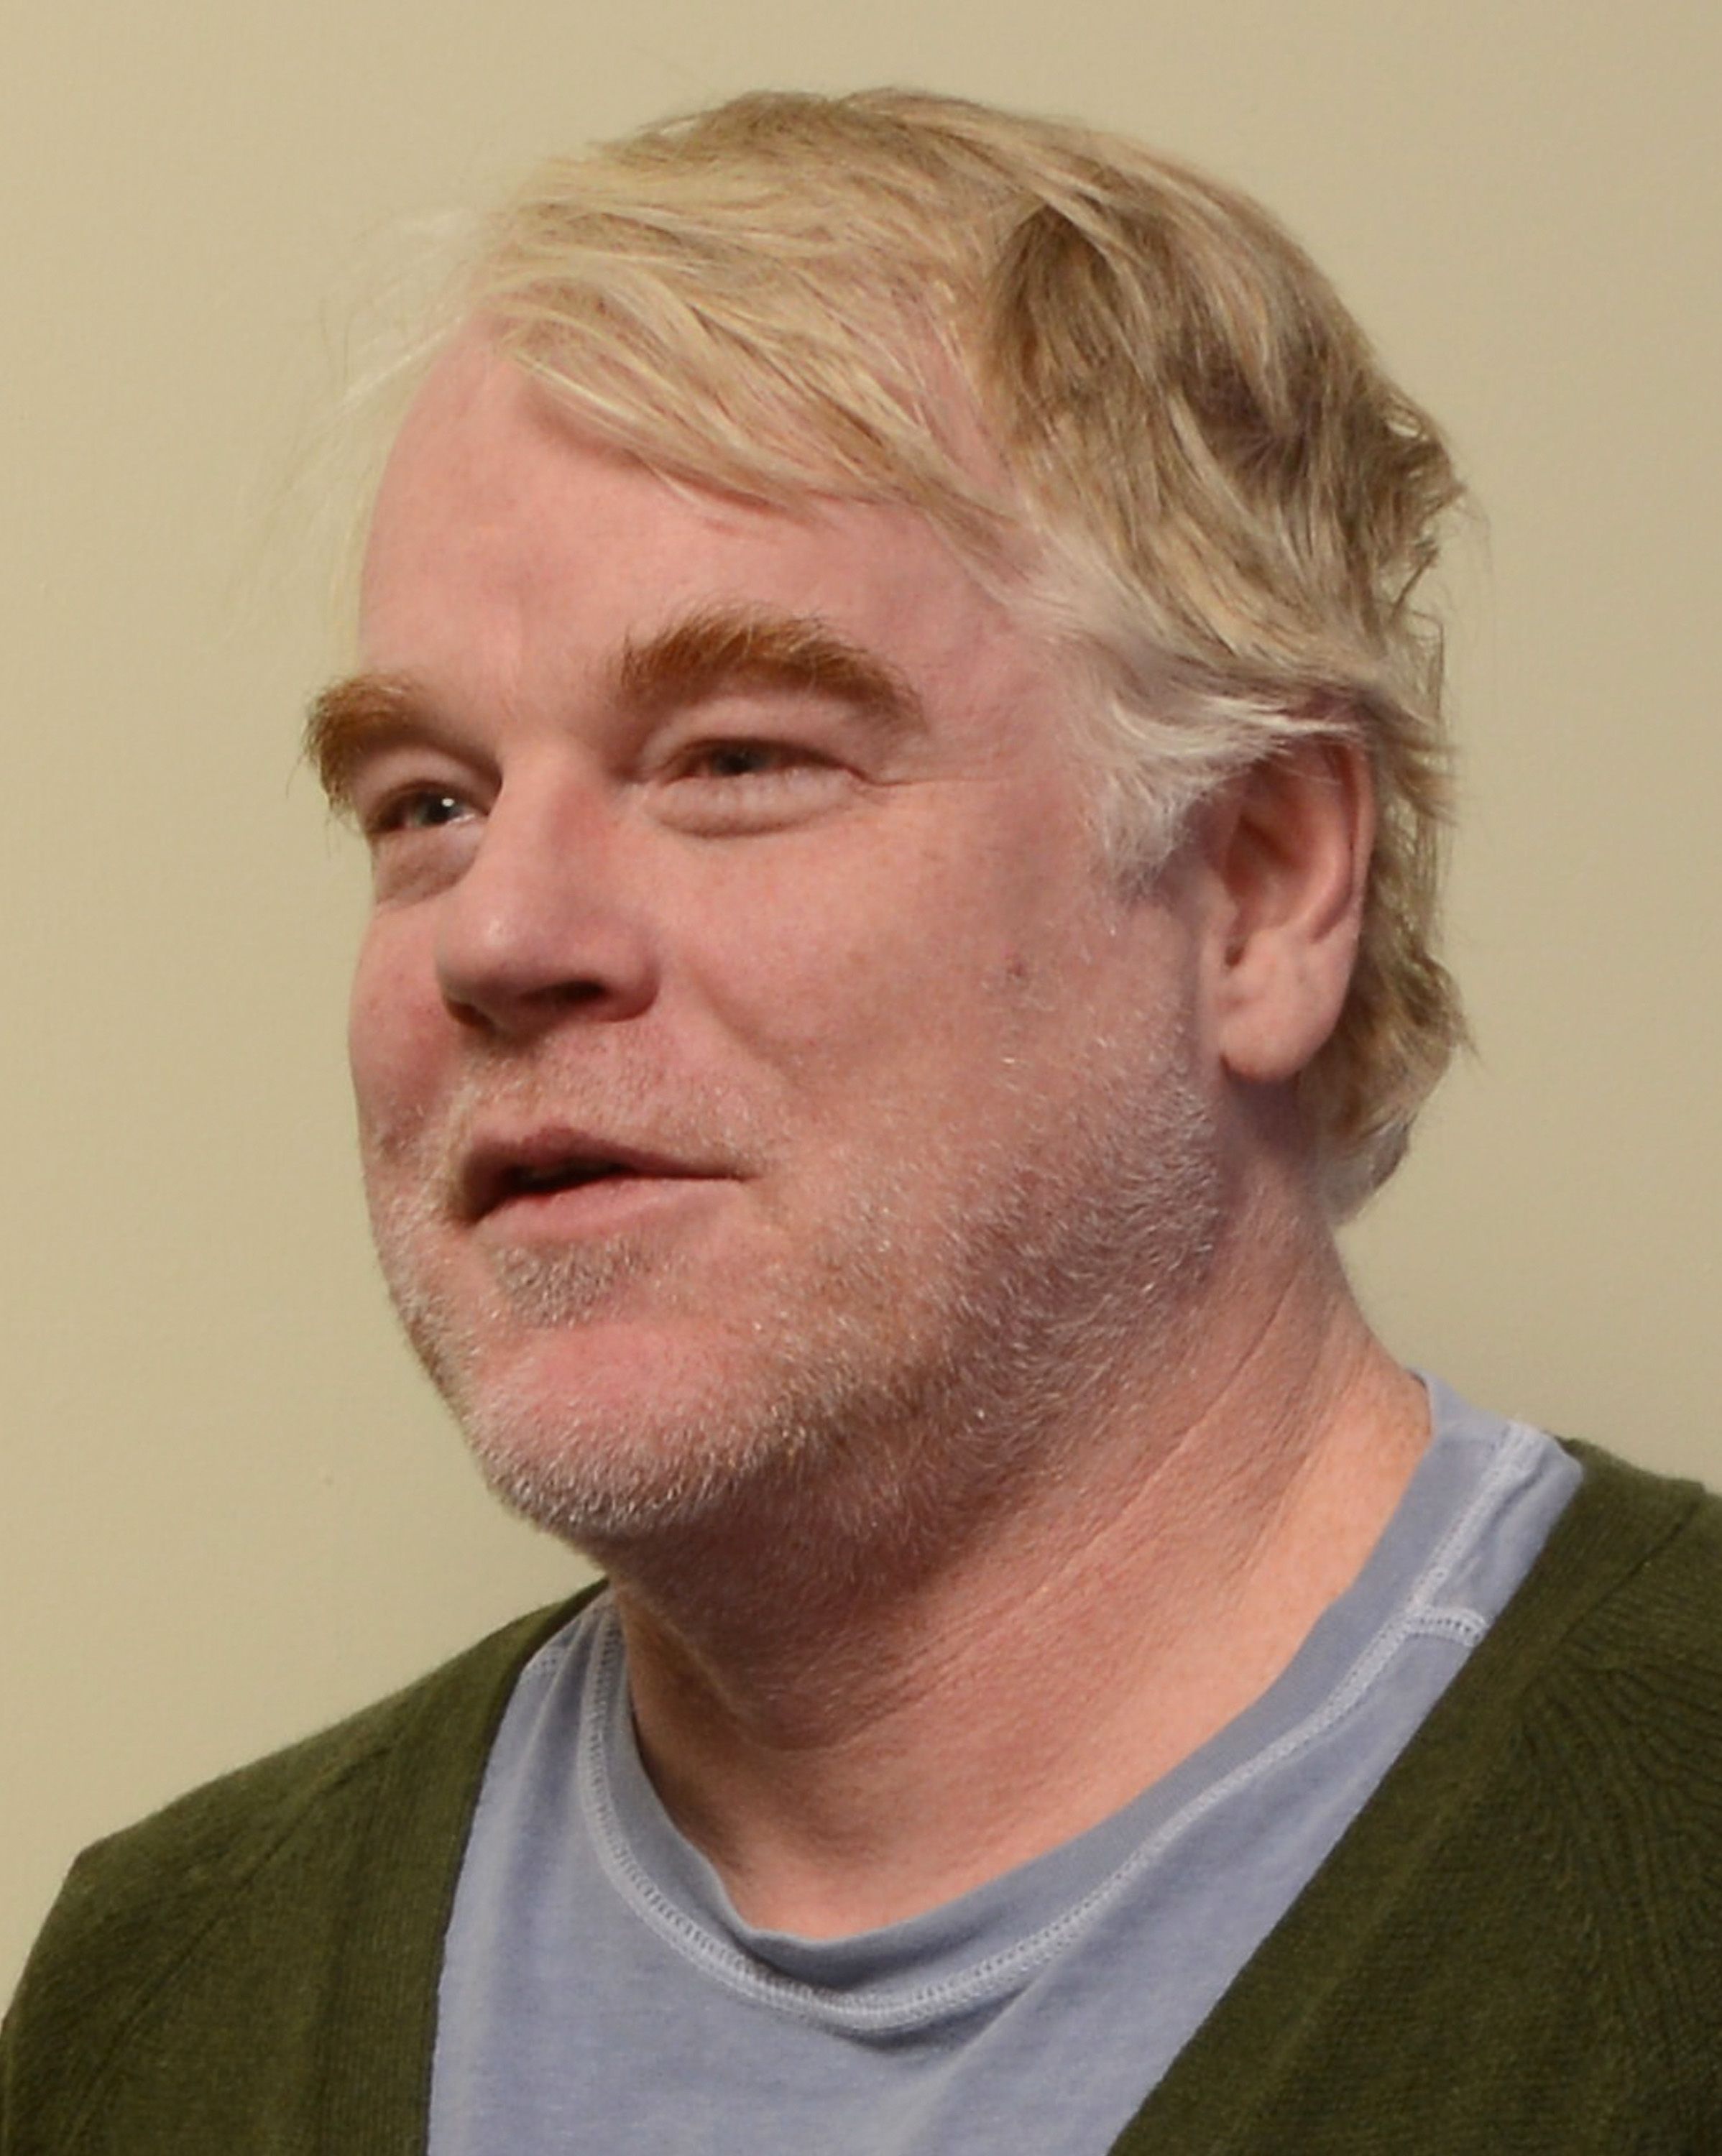 Hoffman at the 2014 Sundance Film Festival in Park City, Utah. (Larry Busacca&mdash;Getty Images)